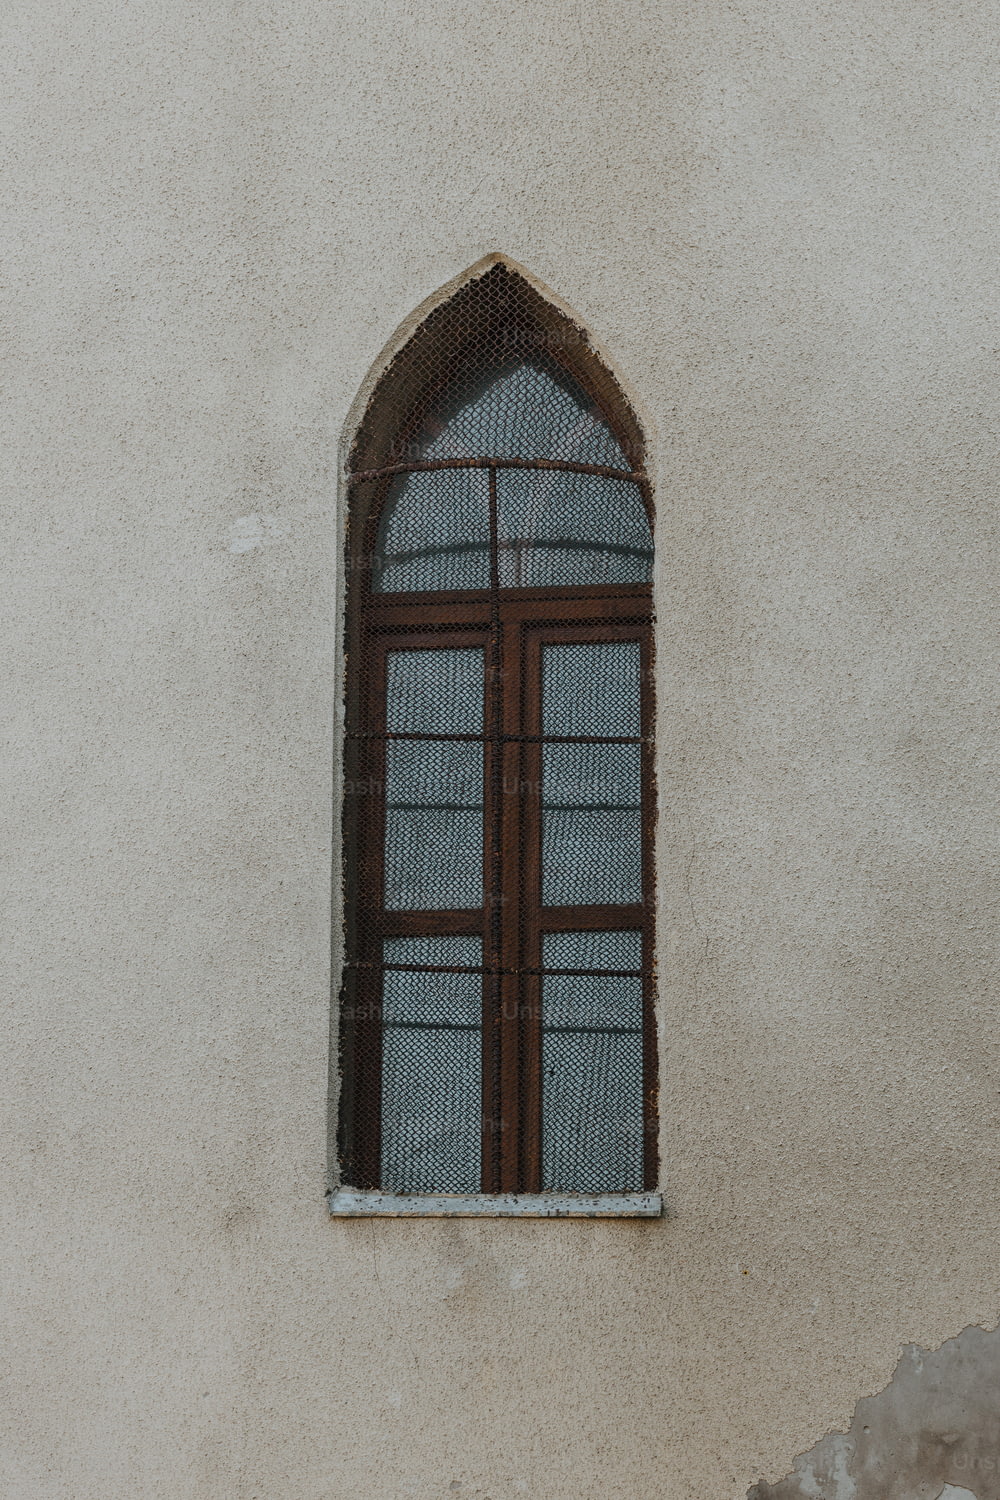 a window on the side of a building